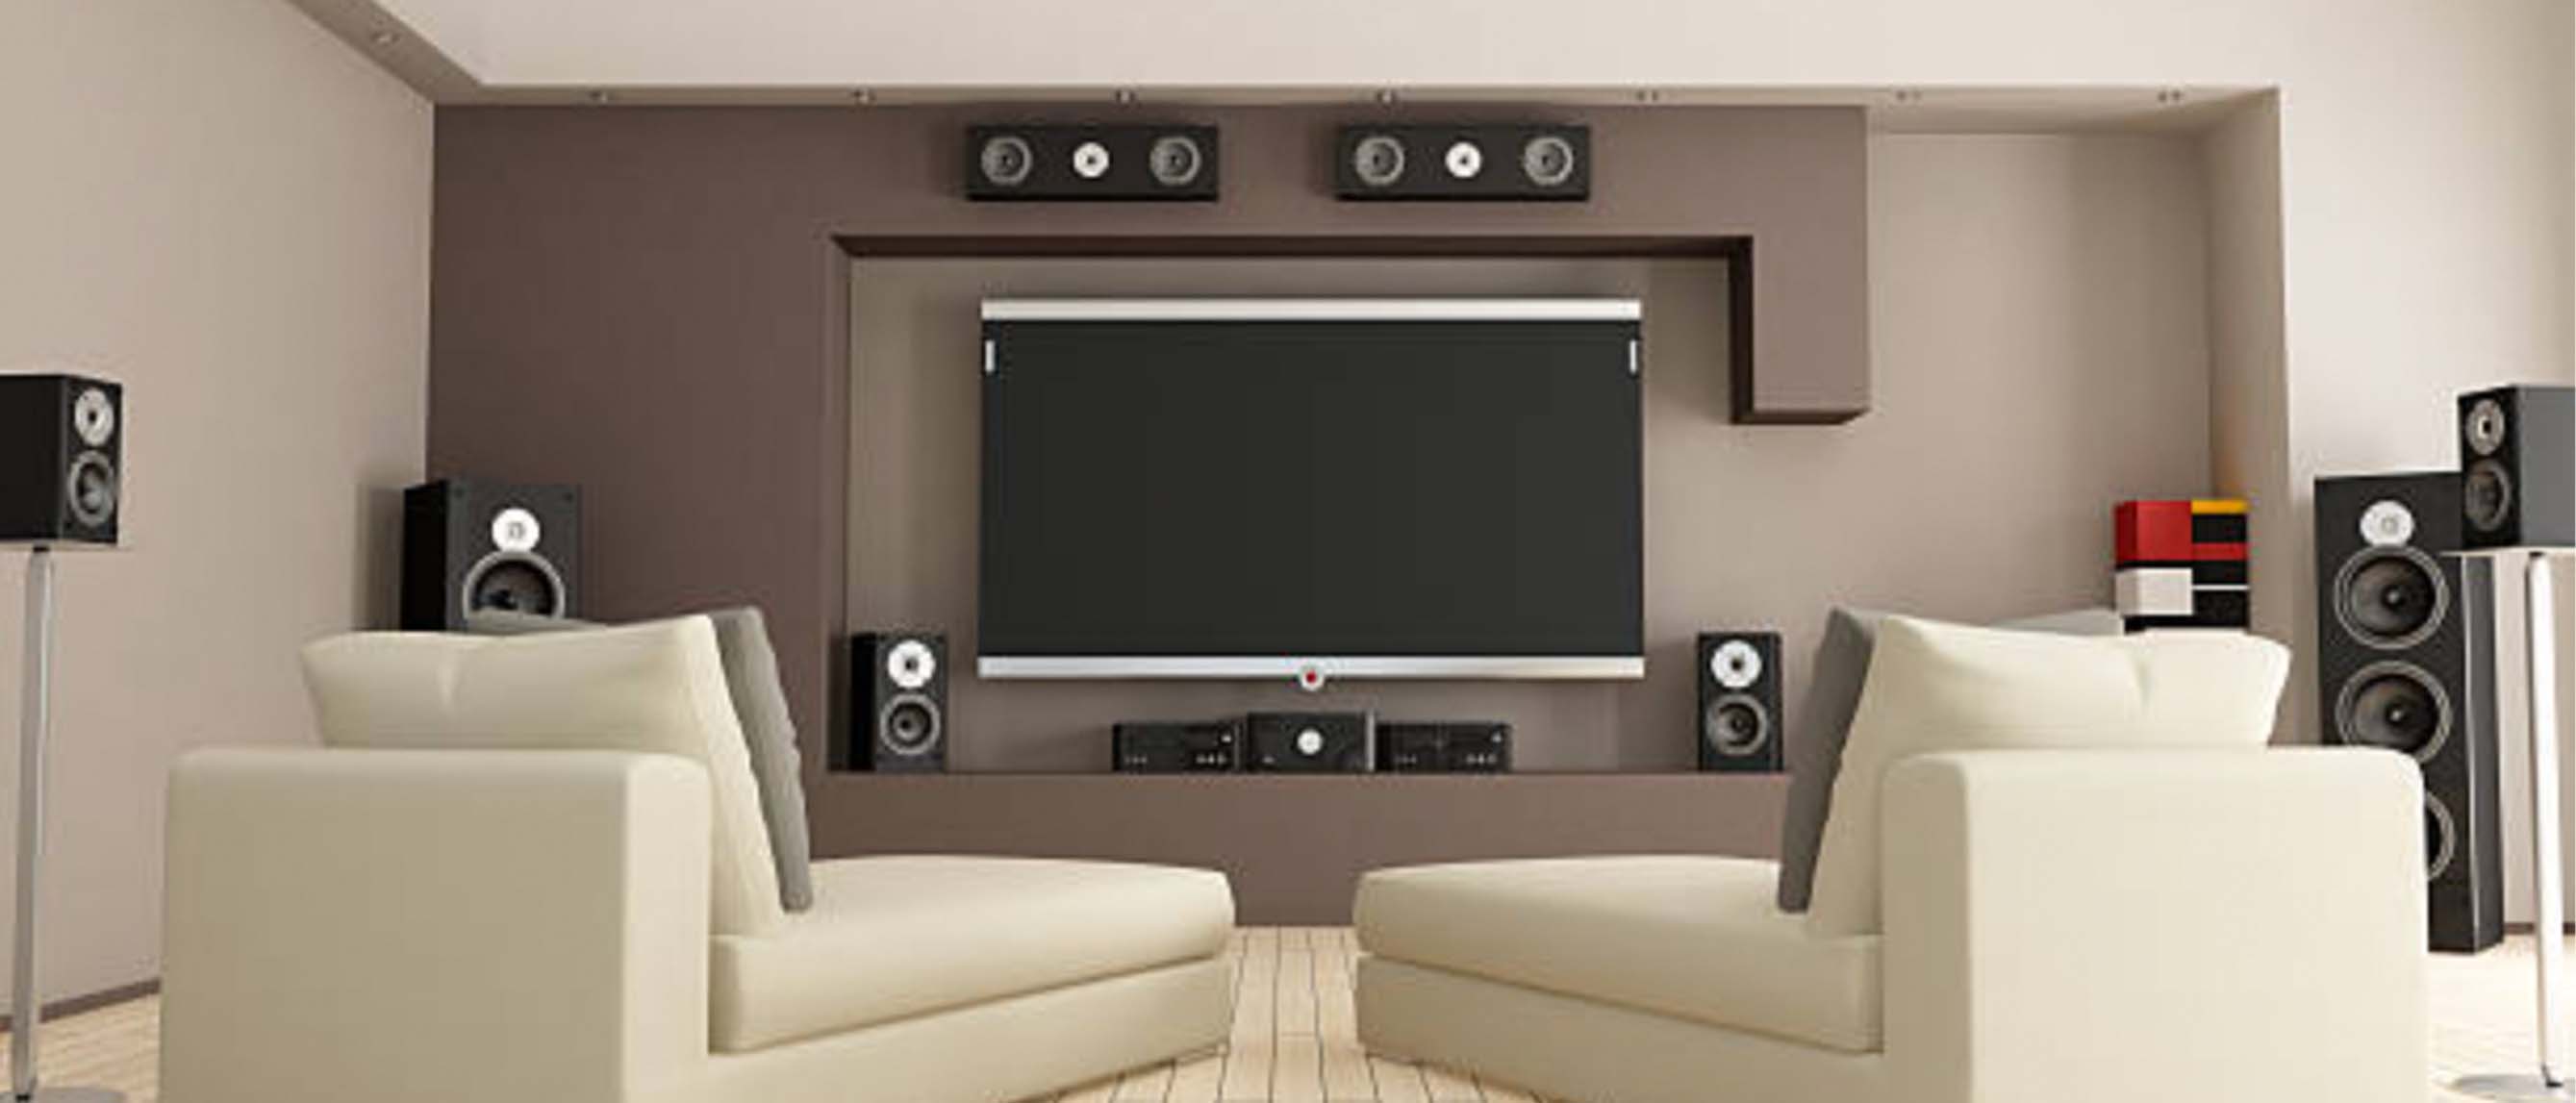 Home theatre system in living room setting